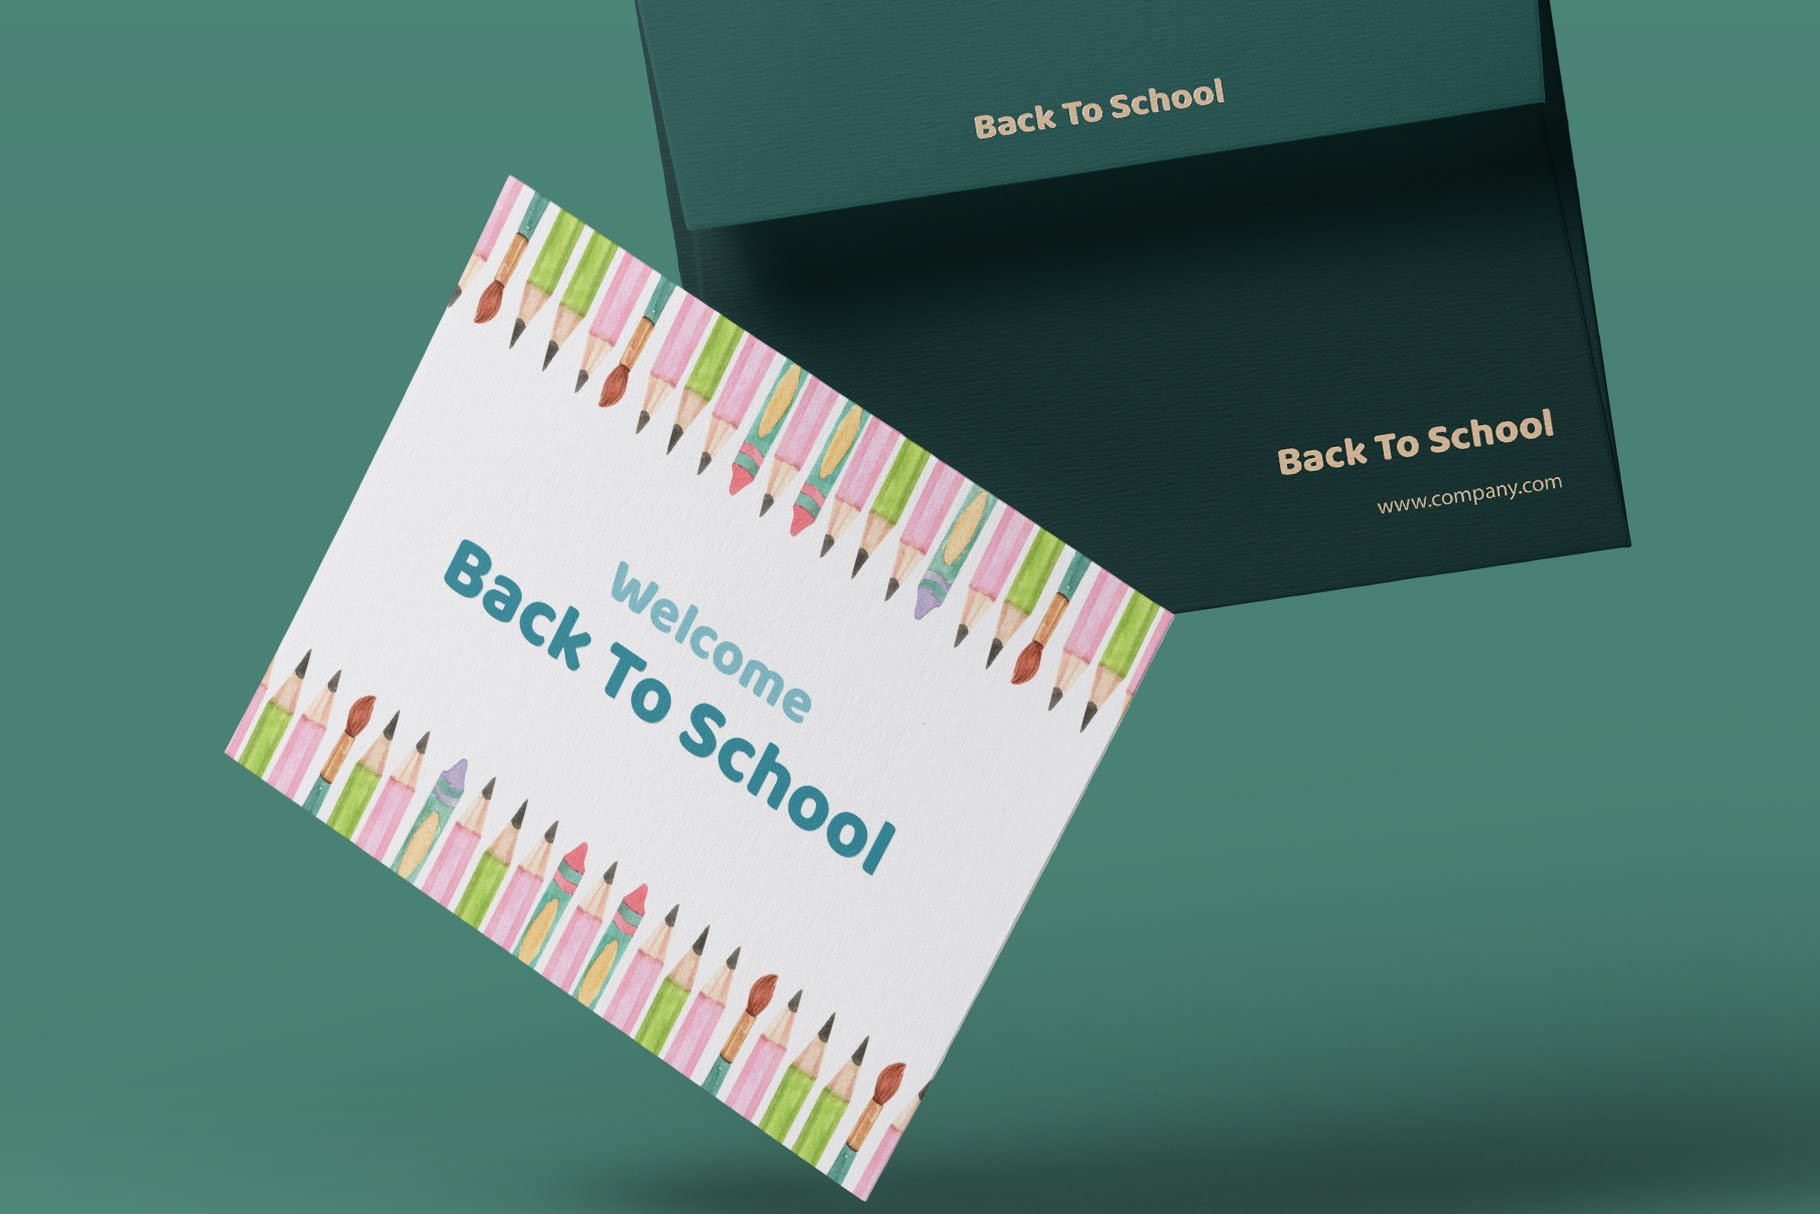 Simple card in a back to school style.